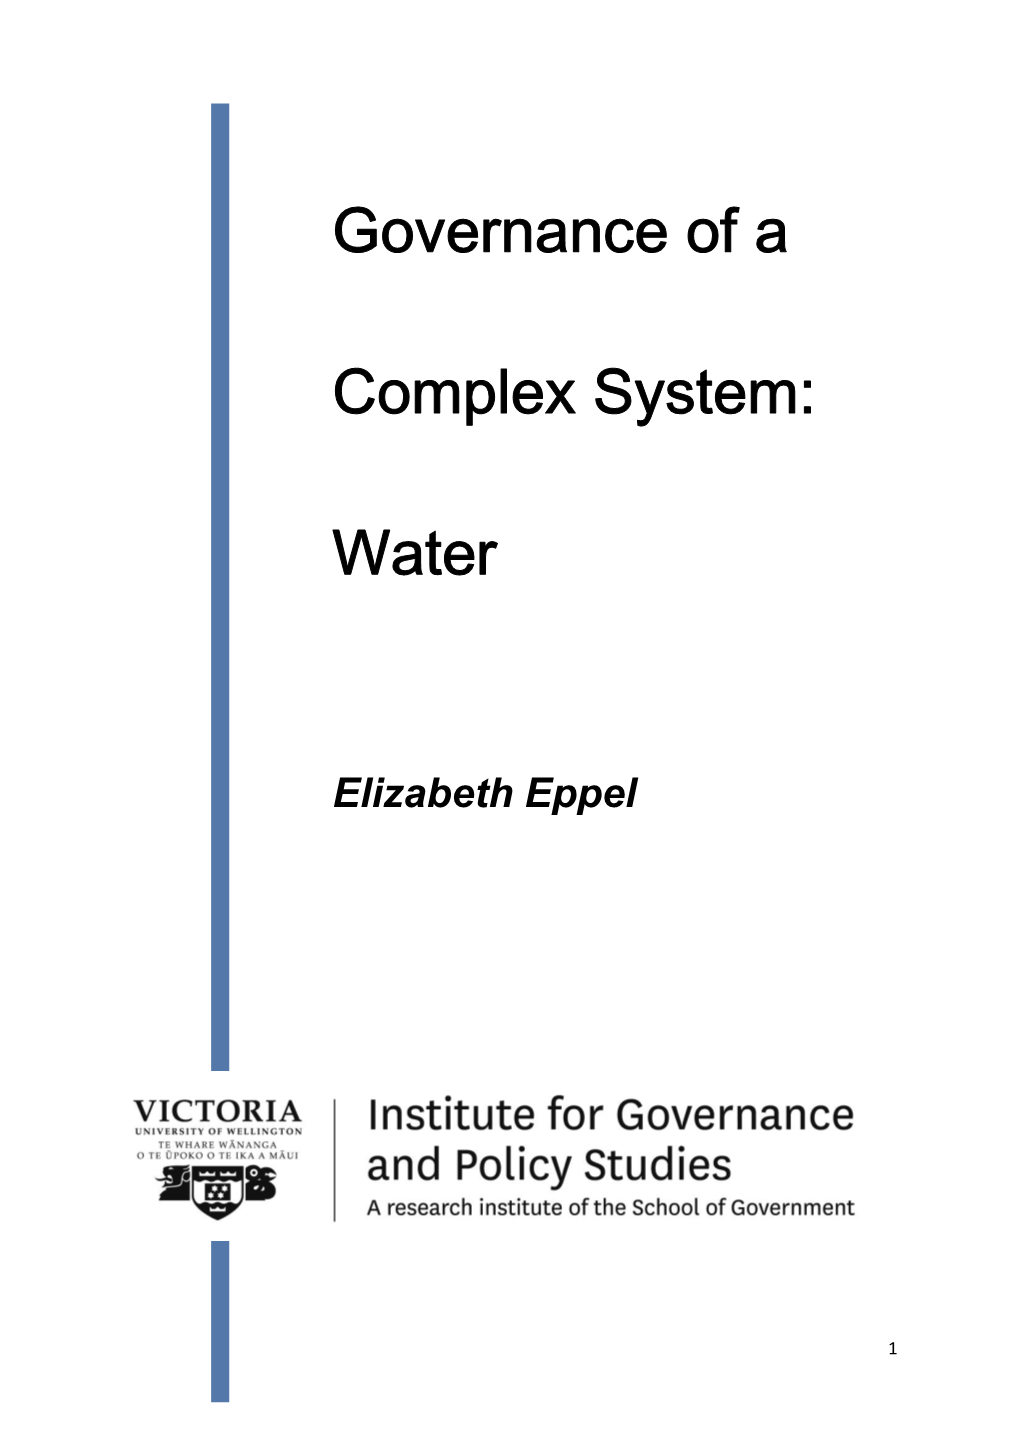 Governance of a Complex System: Water